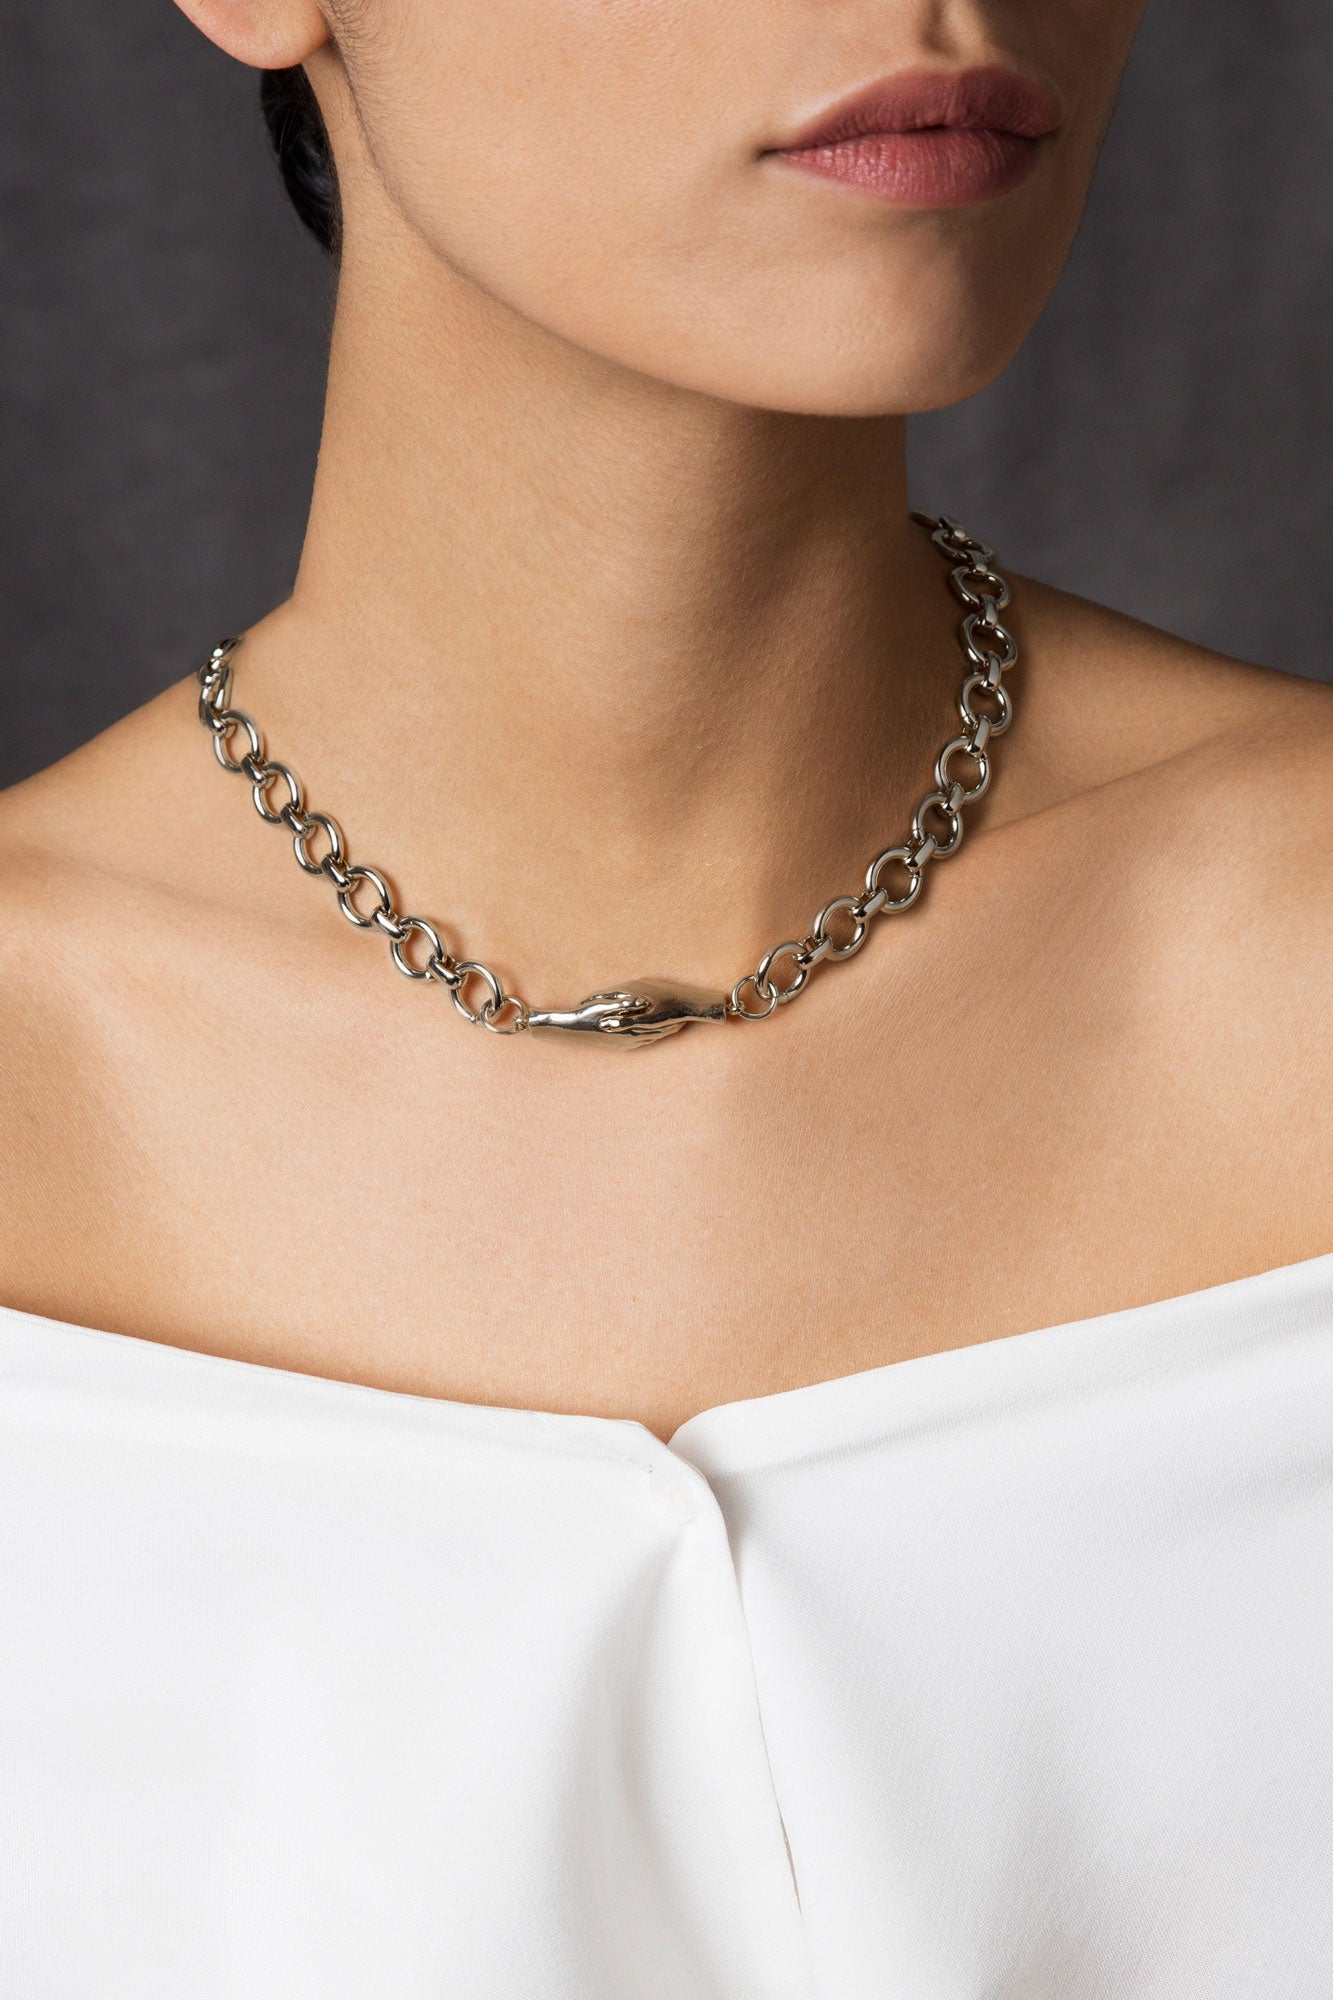 Gentlewoman's Agreement® Necklace in Silver